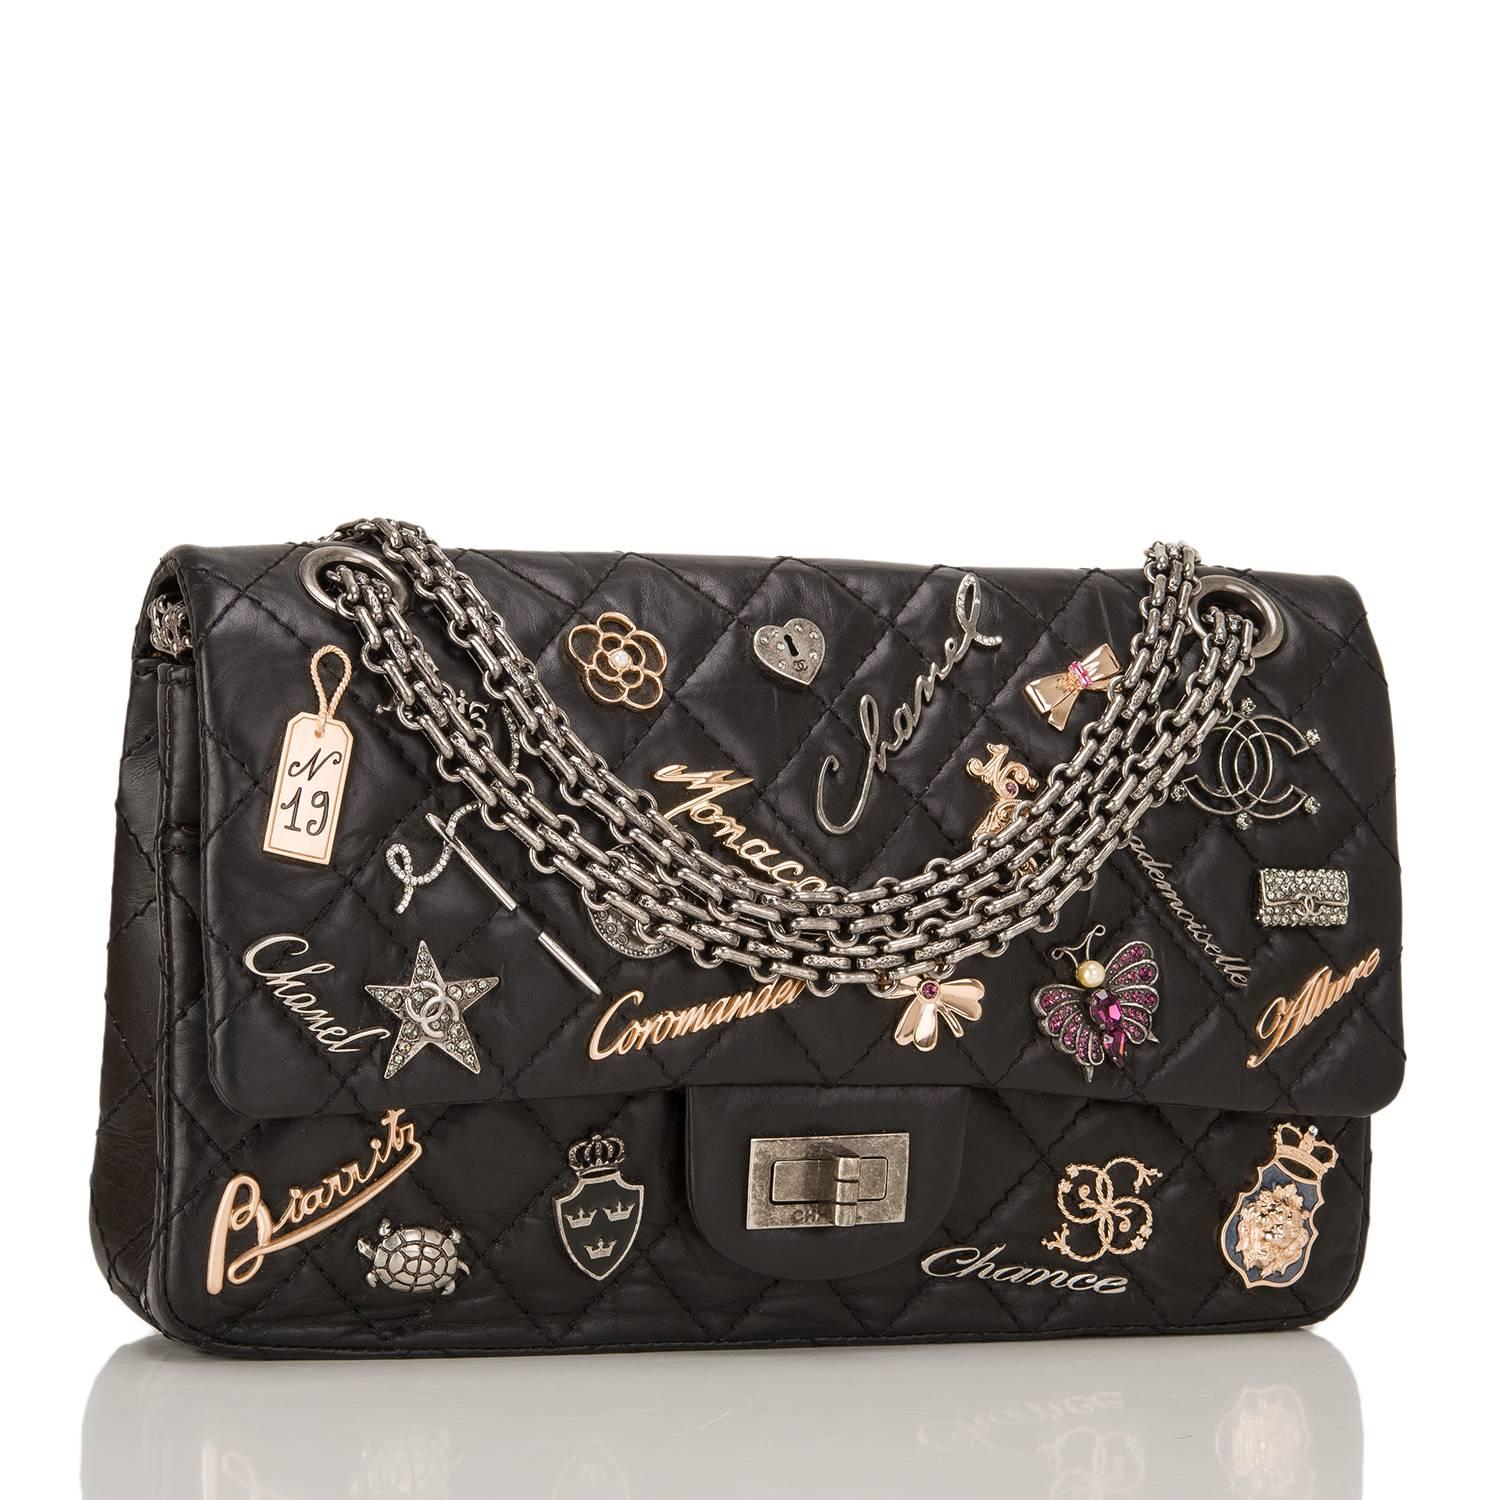  	
This limited edition Chanel Reissue 2.55 Lucky Charms flap bag in size 225 is made of black aged calfskin leather and accented with aged ruthenium hardware.

The bag features 21 iconic Chanel charms including Coco, Star, Camellia, Turtle and